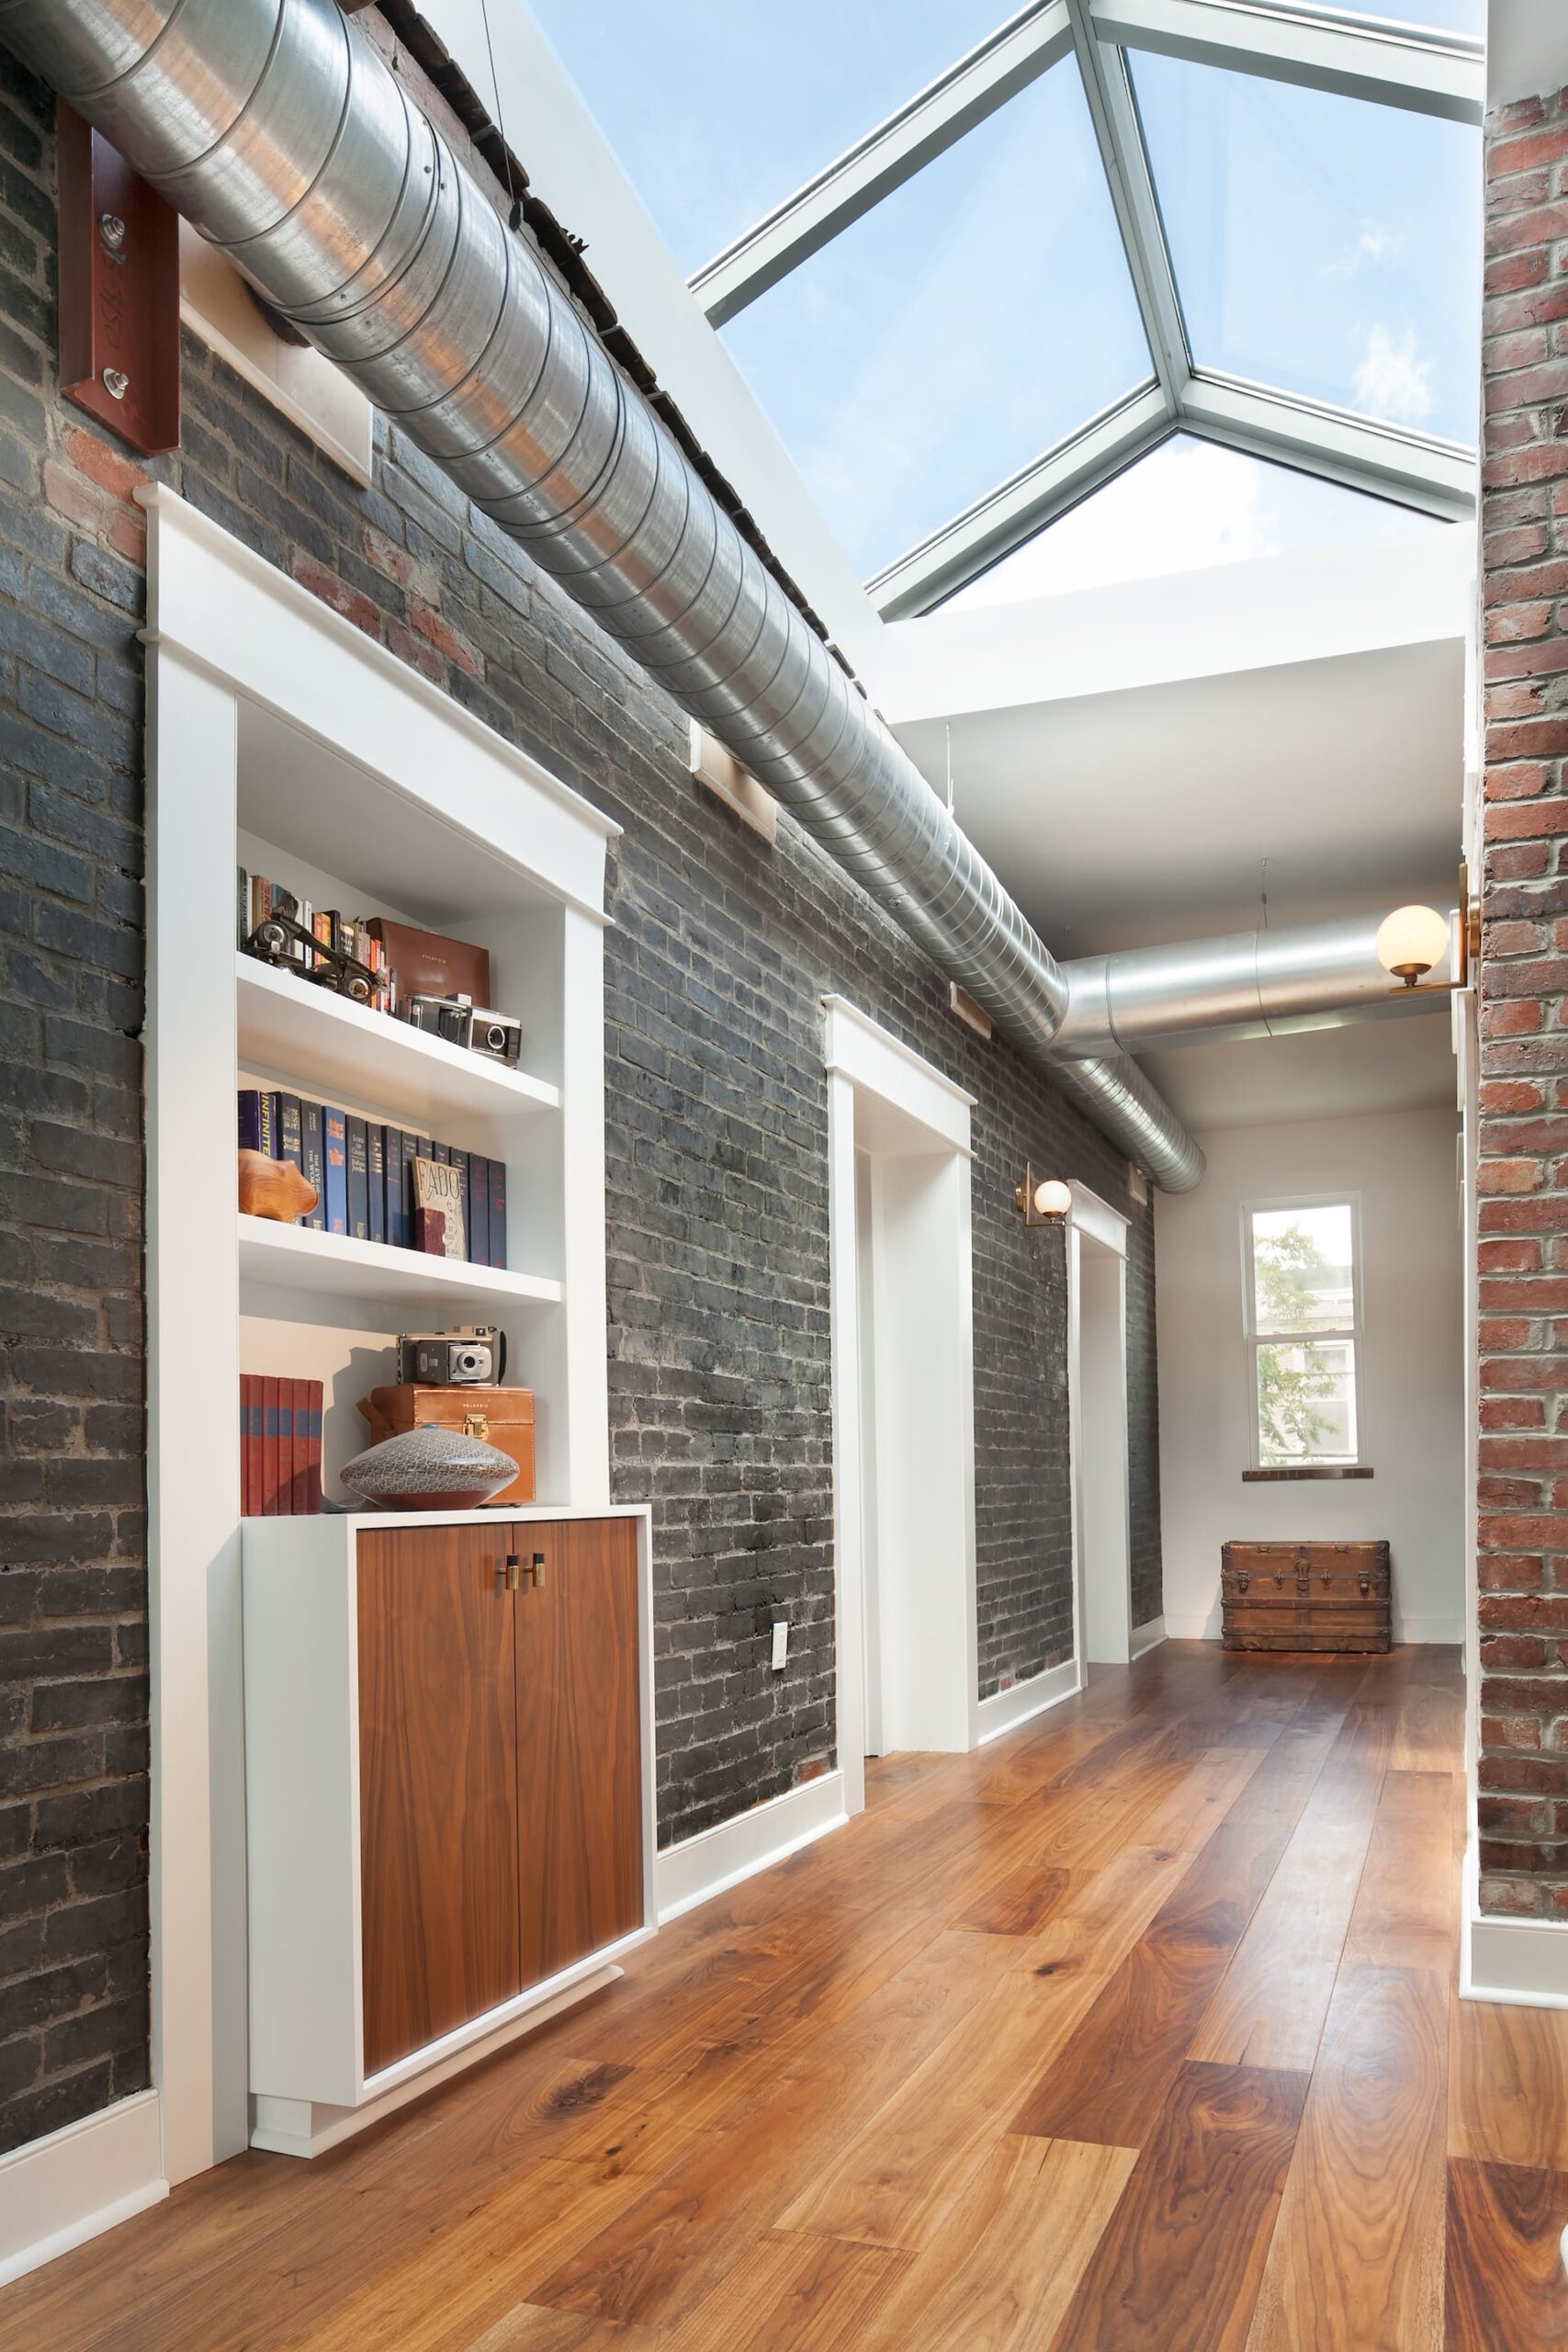 town house renovation in washington dc by carve architects